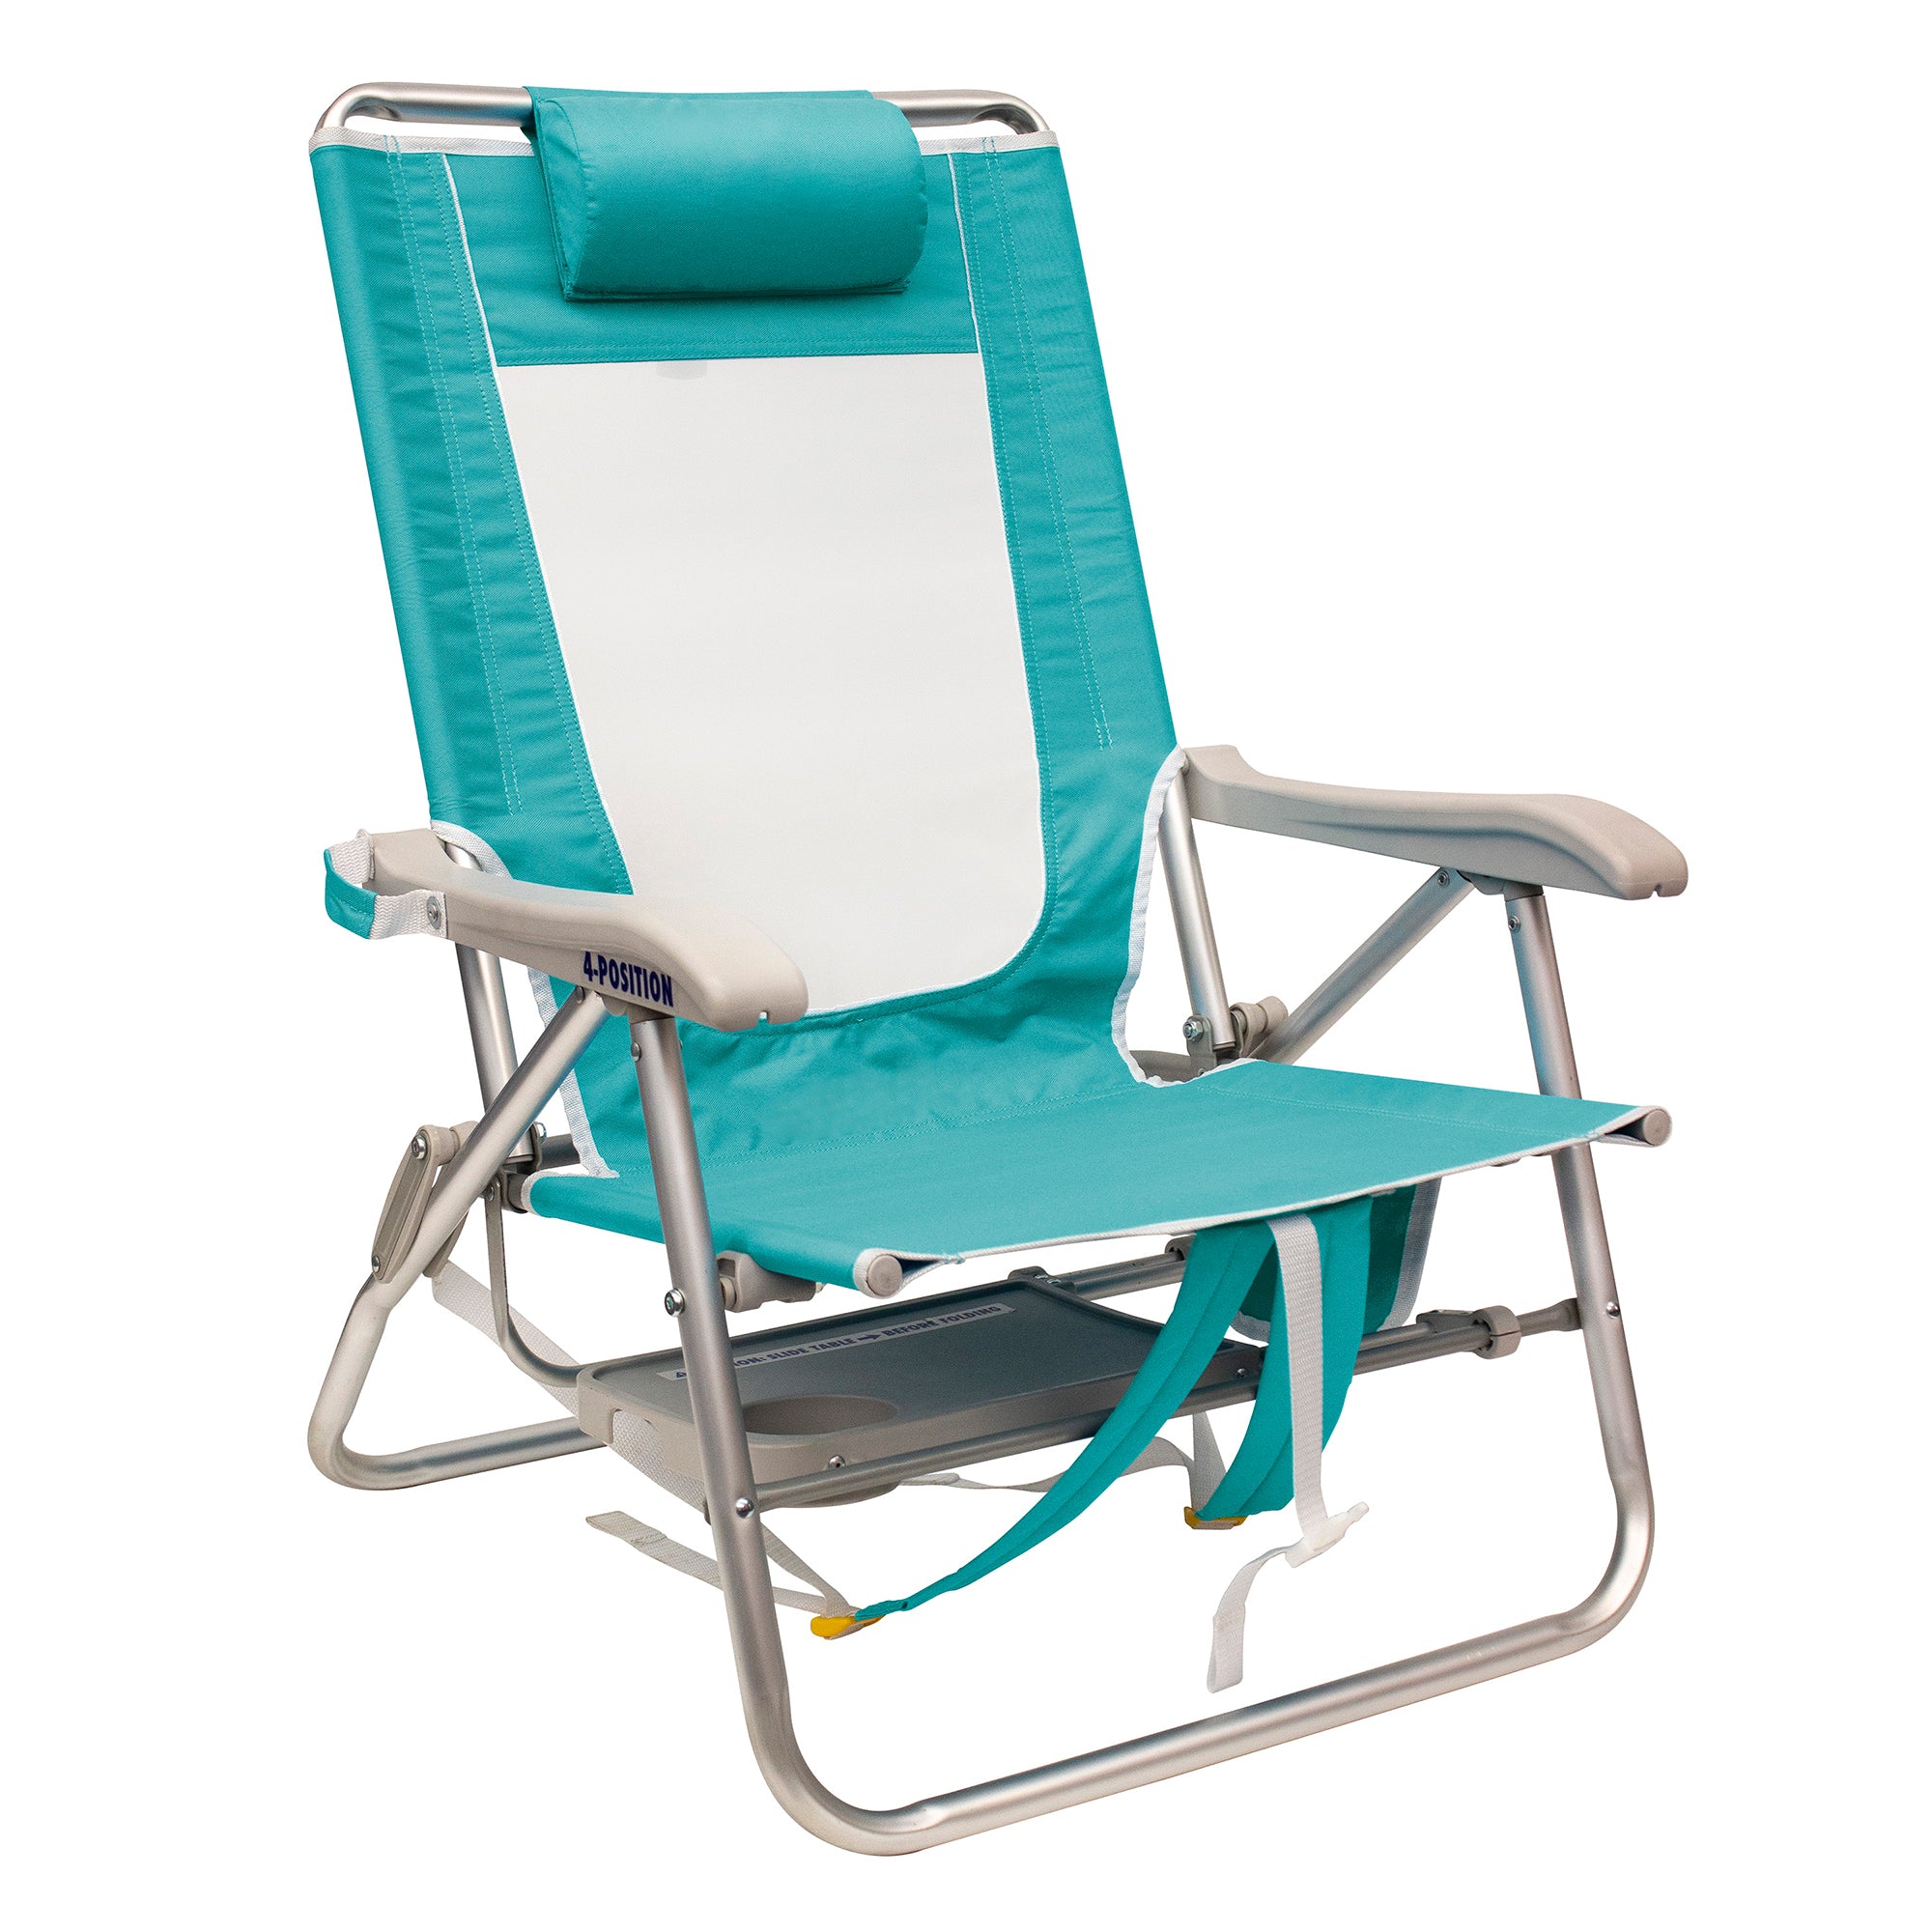 Big Surf with Slide Table, Seafoam Green, Front